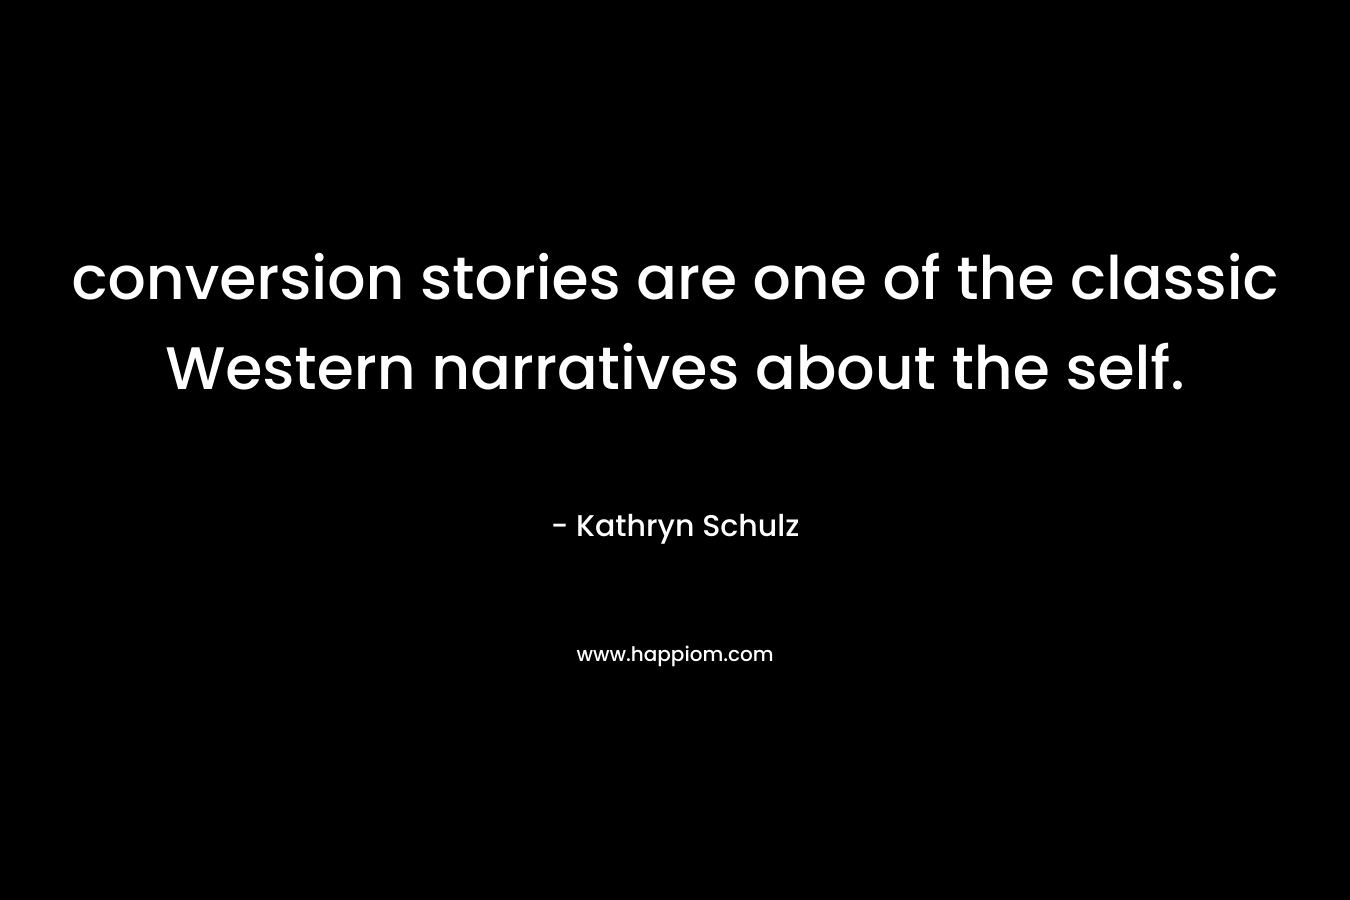 conversion stories are one of the classic Western narratives about the self.